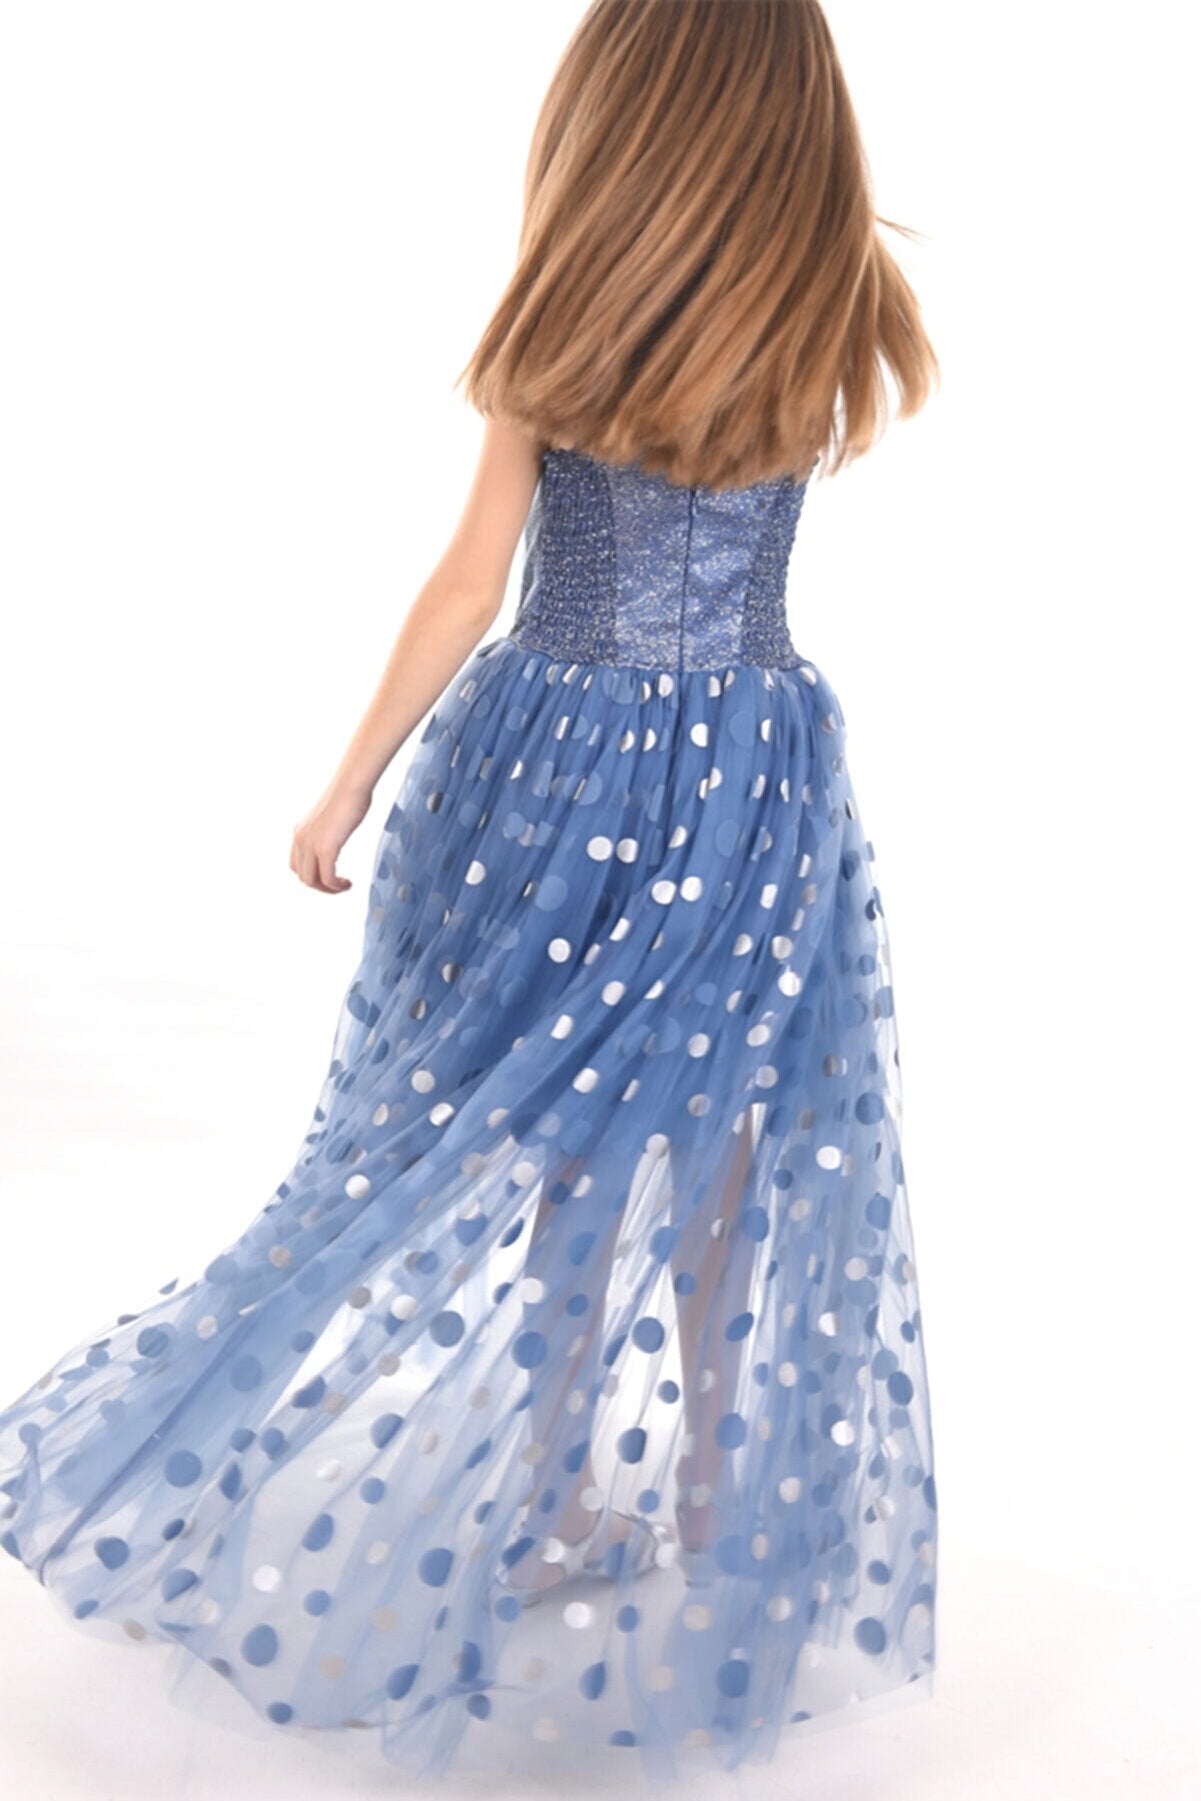 Polka Dot Tulle Dress For Party, Birthday, Evening Dress, Prom Dress